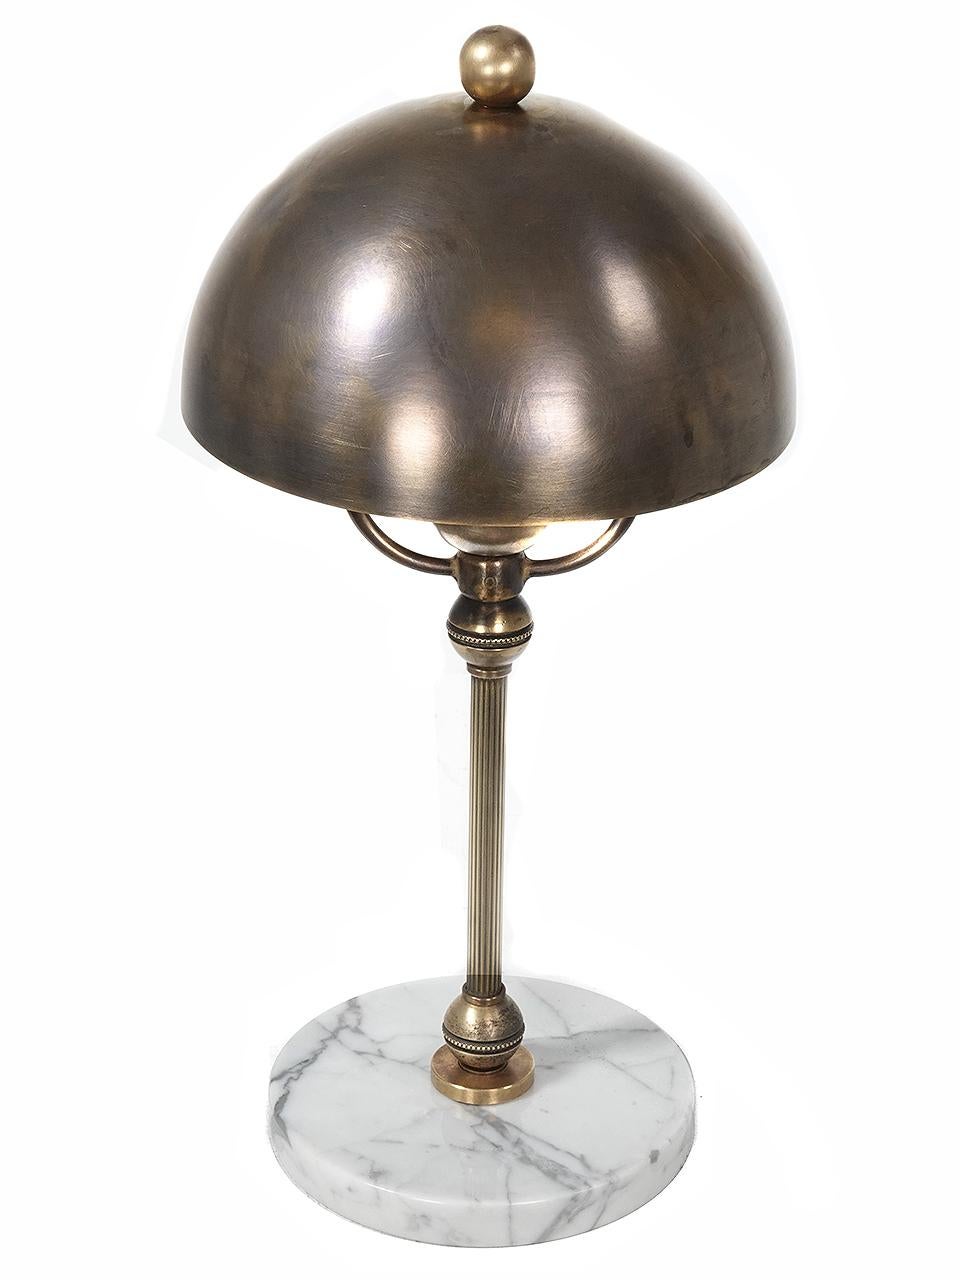 This is a very simple and elegant brass and marble desk lamp. It feels early and modern at the same time. The design is Classic upscale and feels comfortable with all styles of decor. It is very well made in and hand finished in heavy brass and